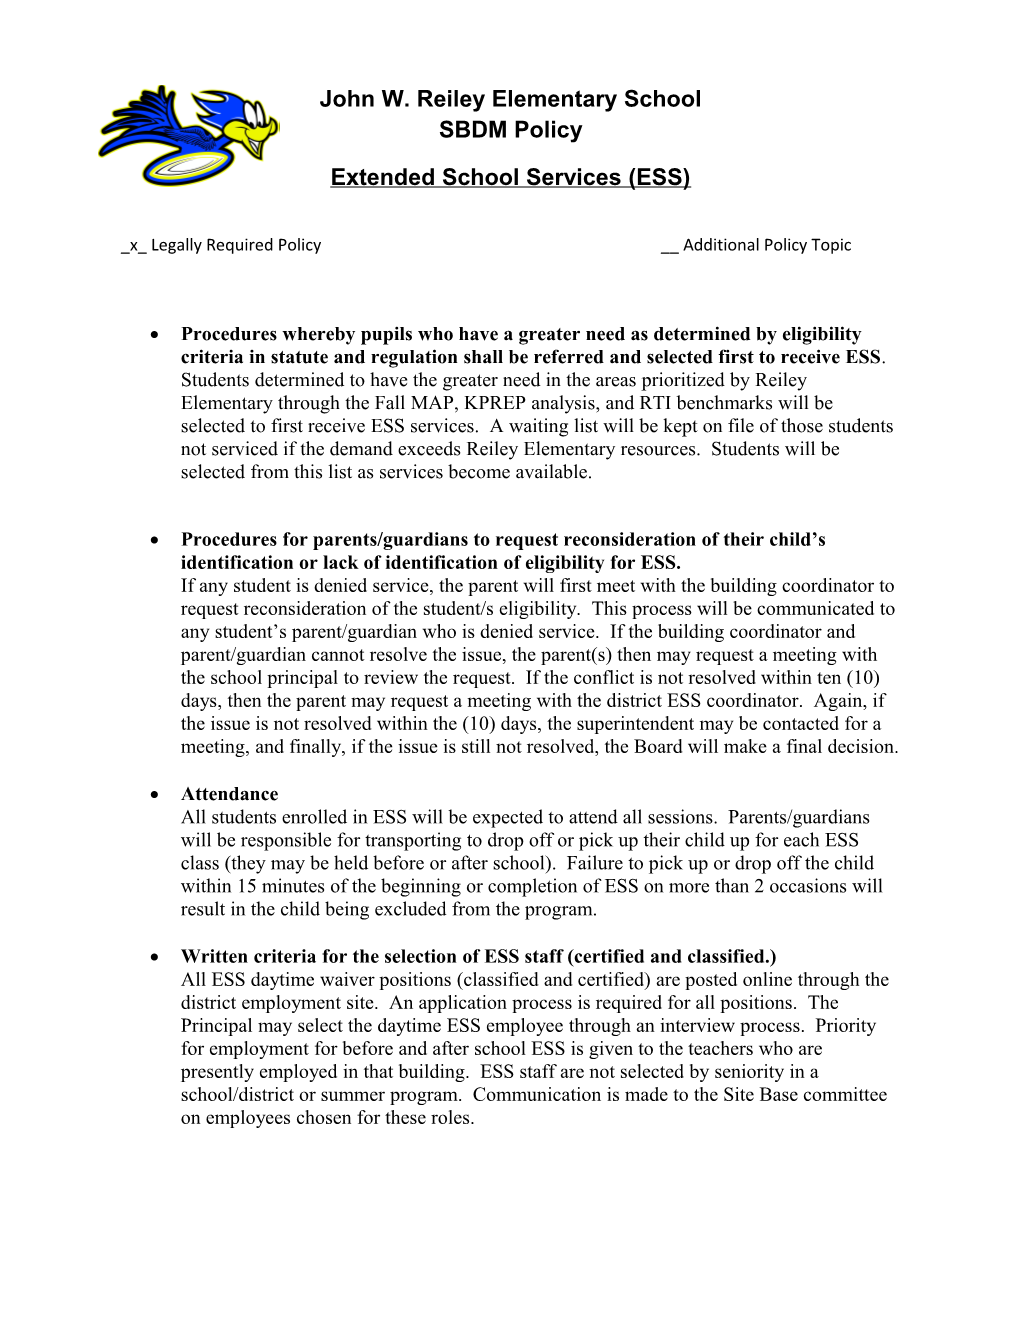 Extended School Services (ESS)